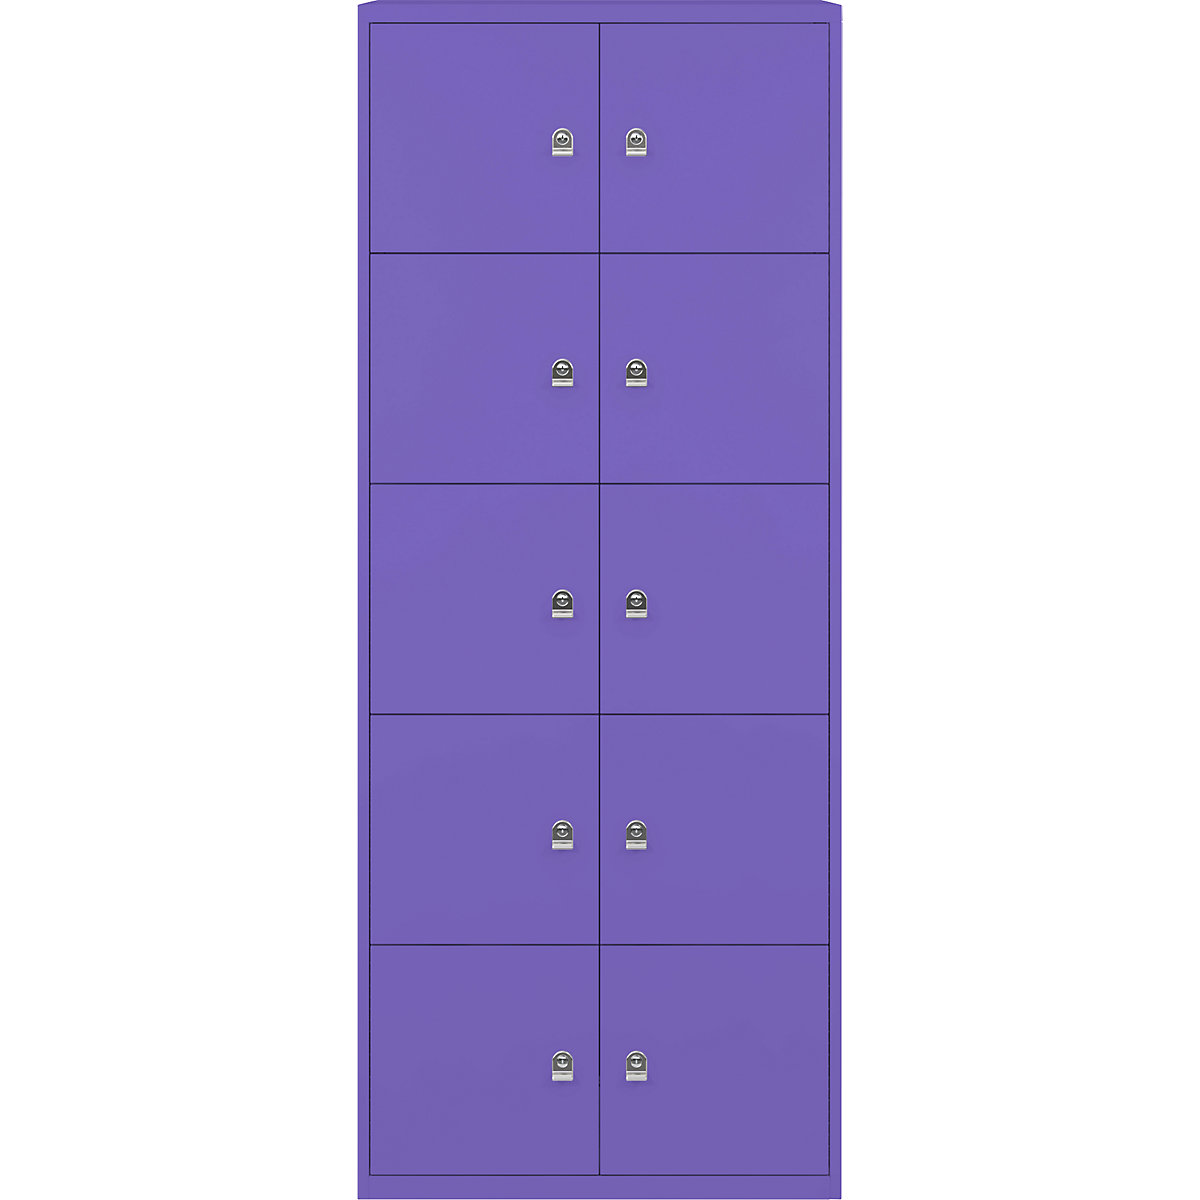 LateralFile™ lodge – BISLEY, with 10 lockable compartments, height 375 mm each, parma-10